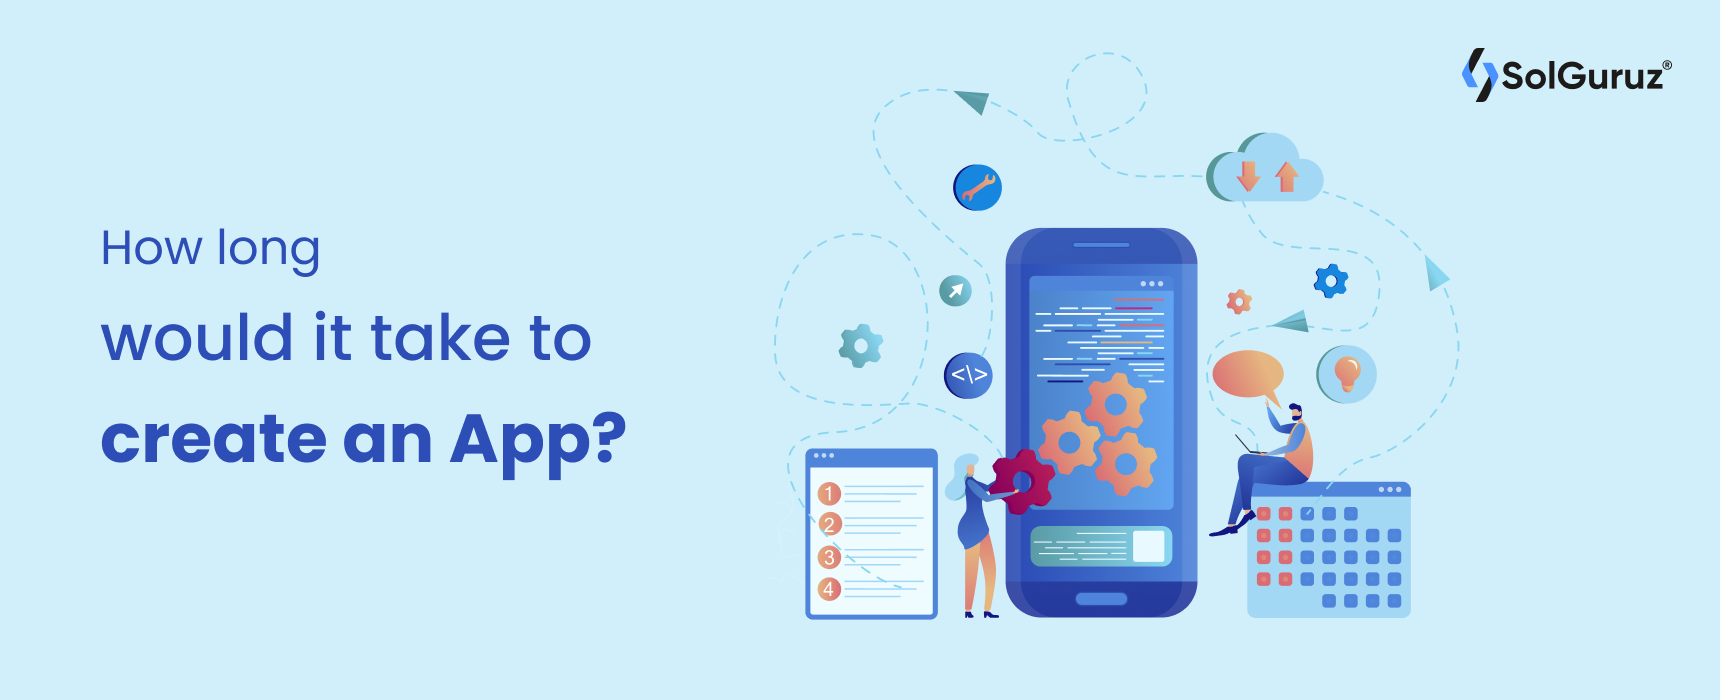 How long would it take to create an App